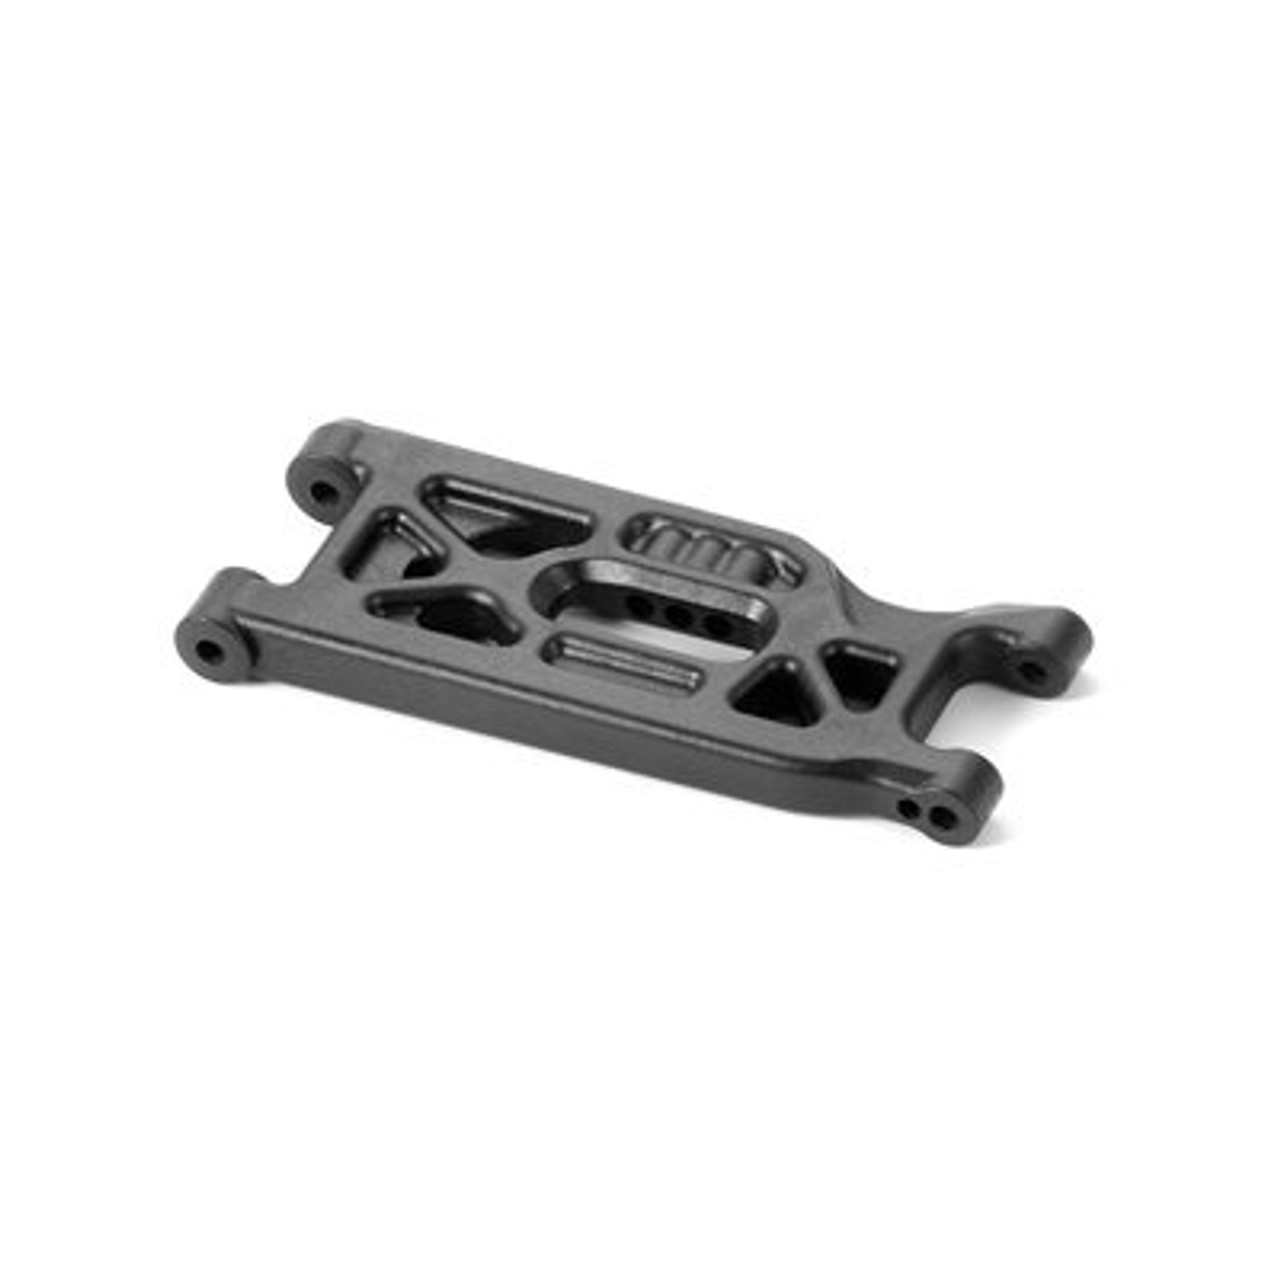 XRAY XB2 Front Lower Composite Suspension Arm (Hard)